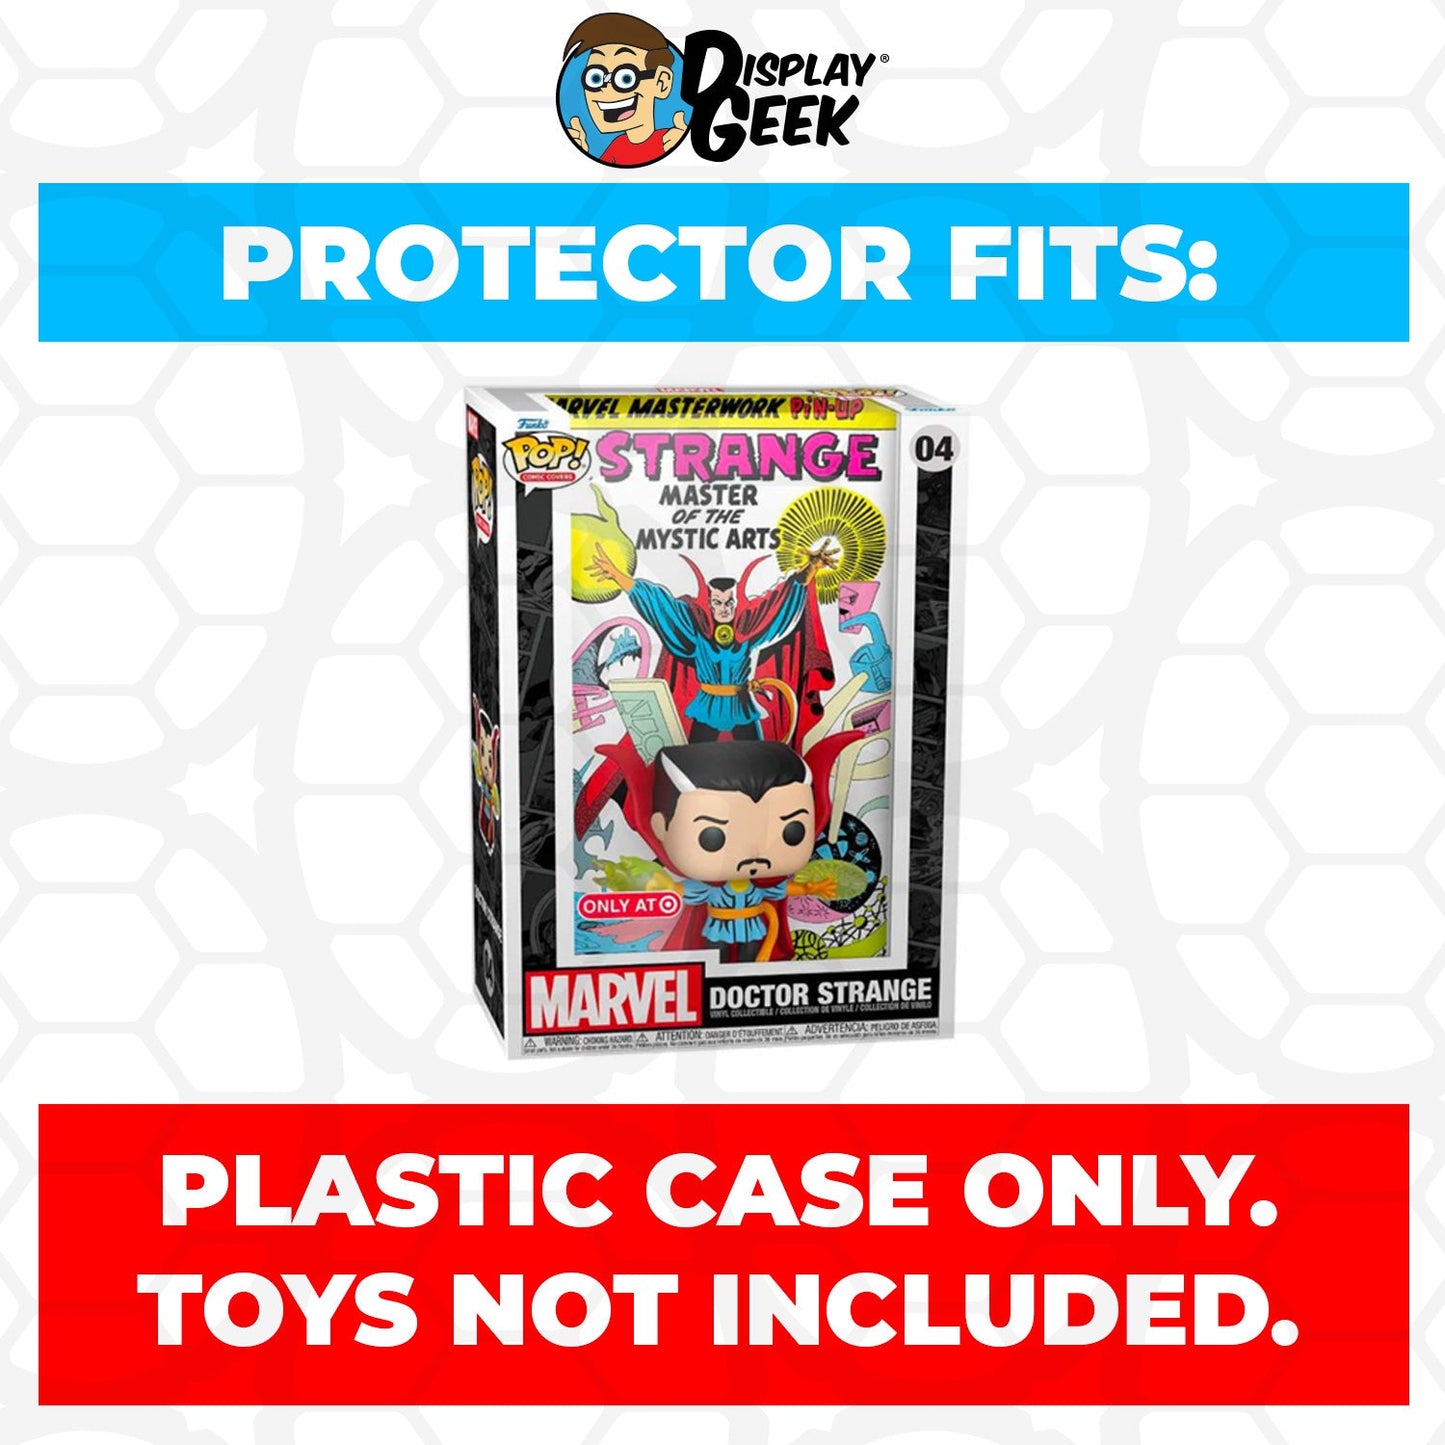 Pop Protector for Doctor Strange Master Mystic Arts #04 Funko Pop Comic Covers - PPG Pop Protector Guide Search Created by Display Geek